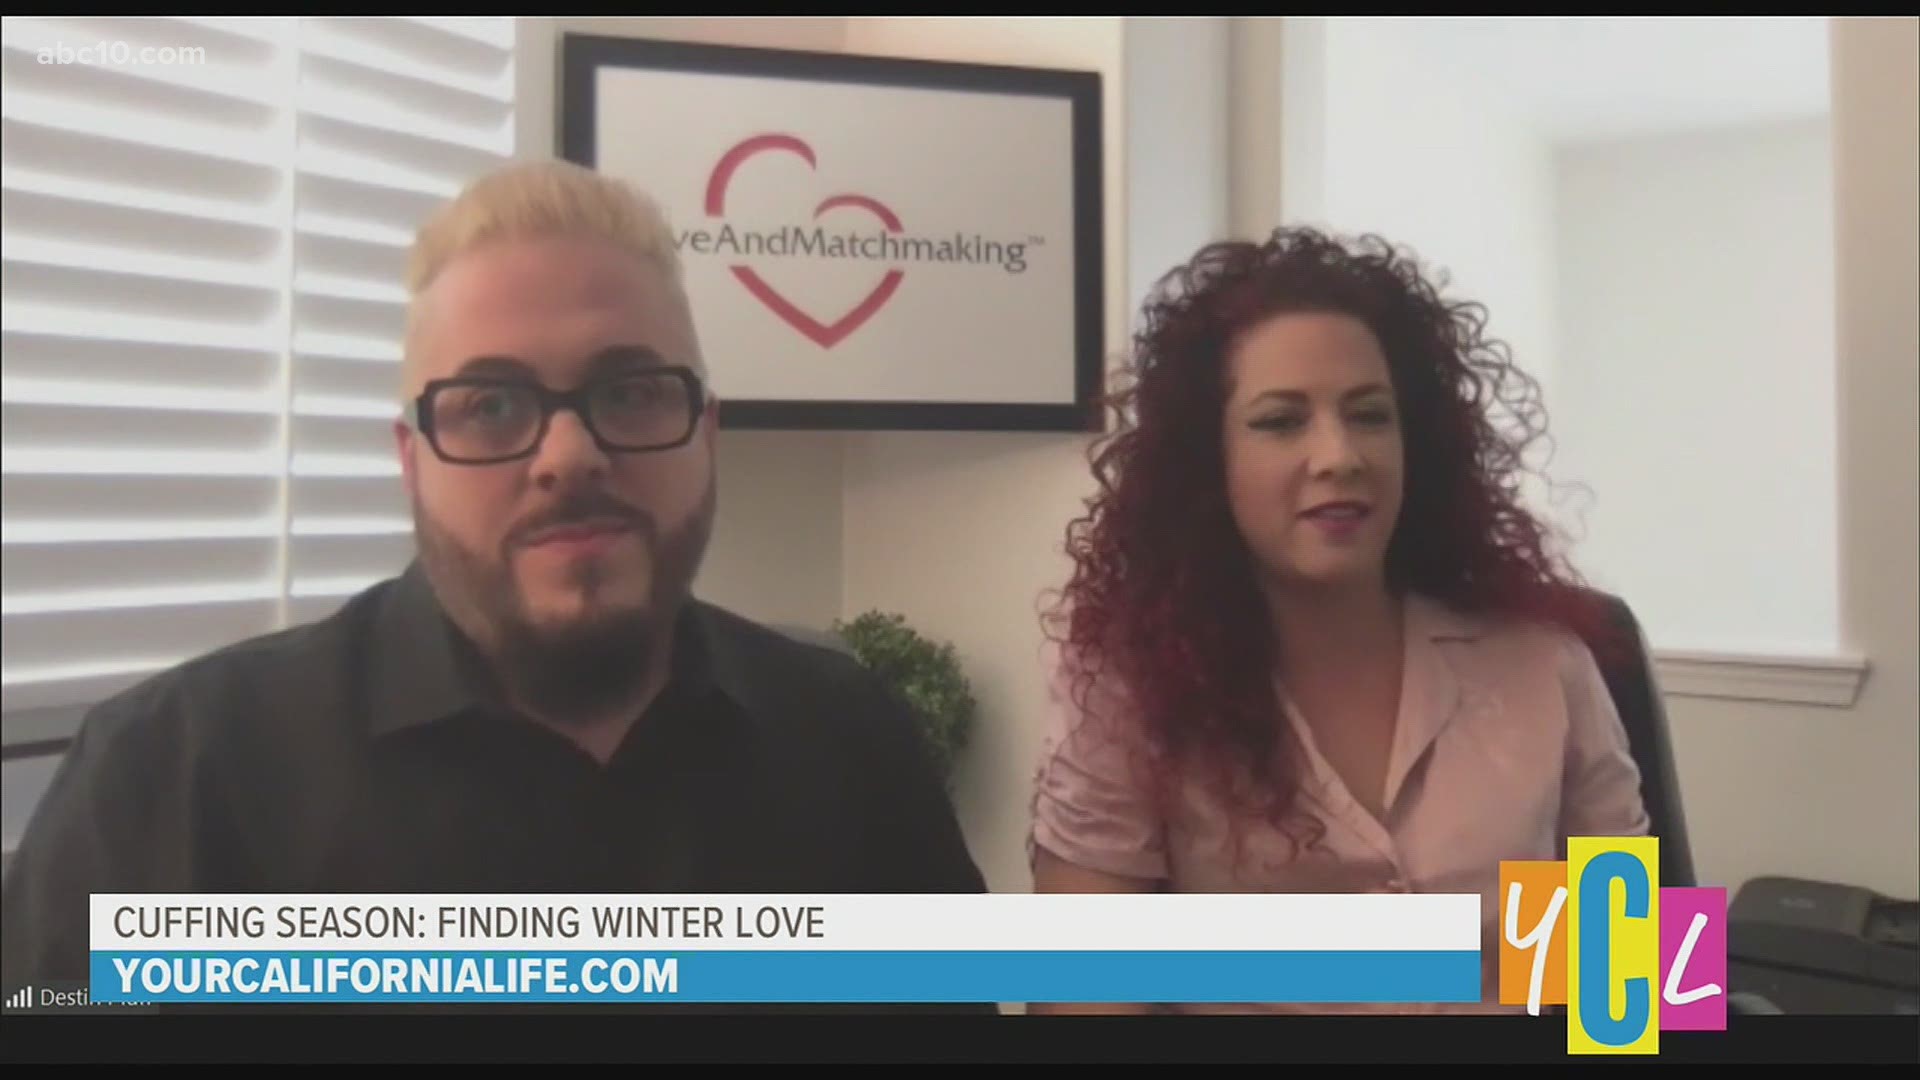 Elite matchmakers tell us why singles look for a romantic partner during the holiday season, along with fun seasonal date ideas for you and that new beau!